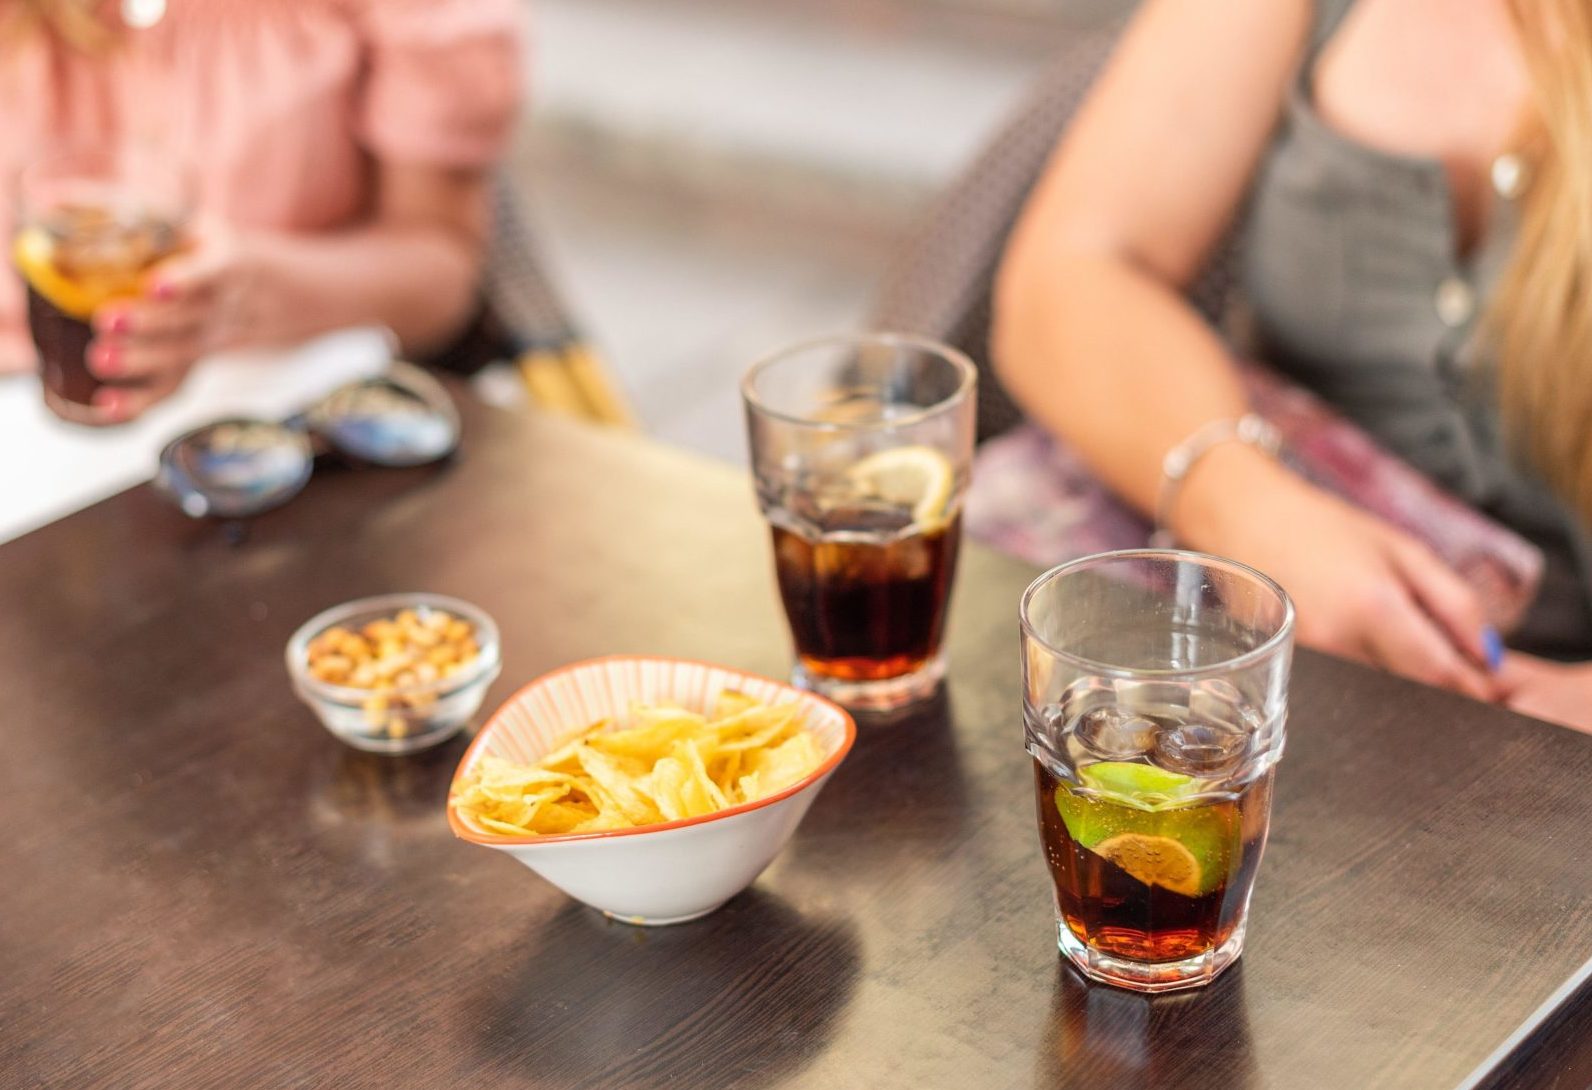 A view of drinks and snacks on a table in Spain in May 2021